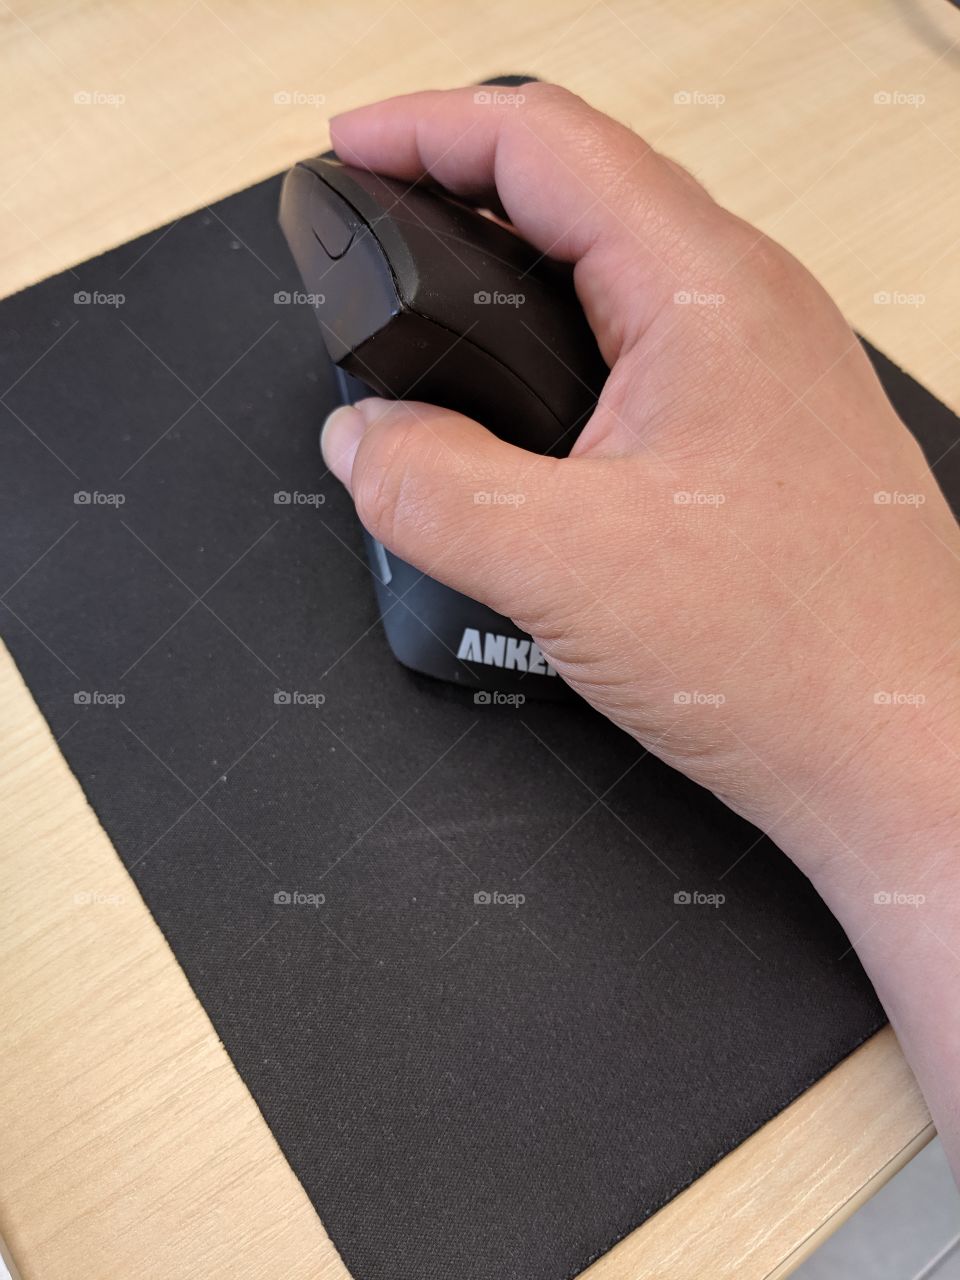 vertical mouse, rsi, accessibility